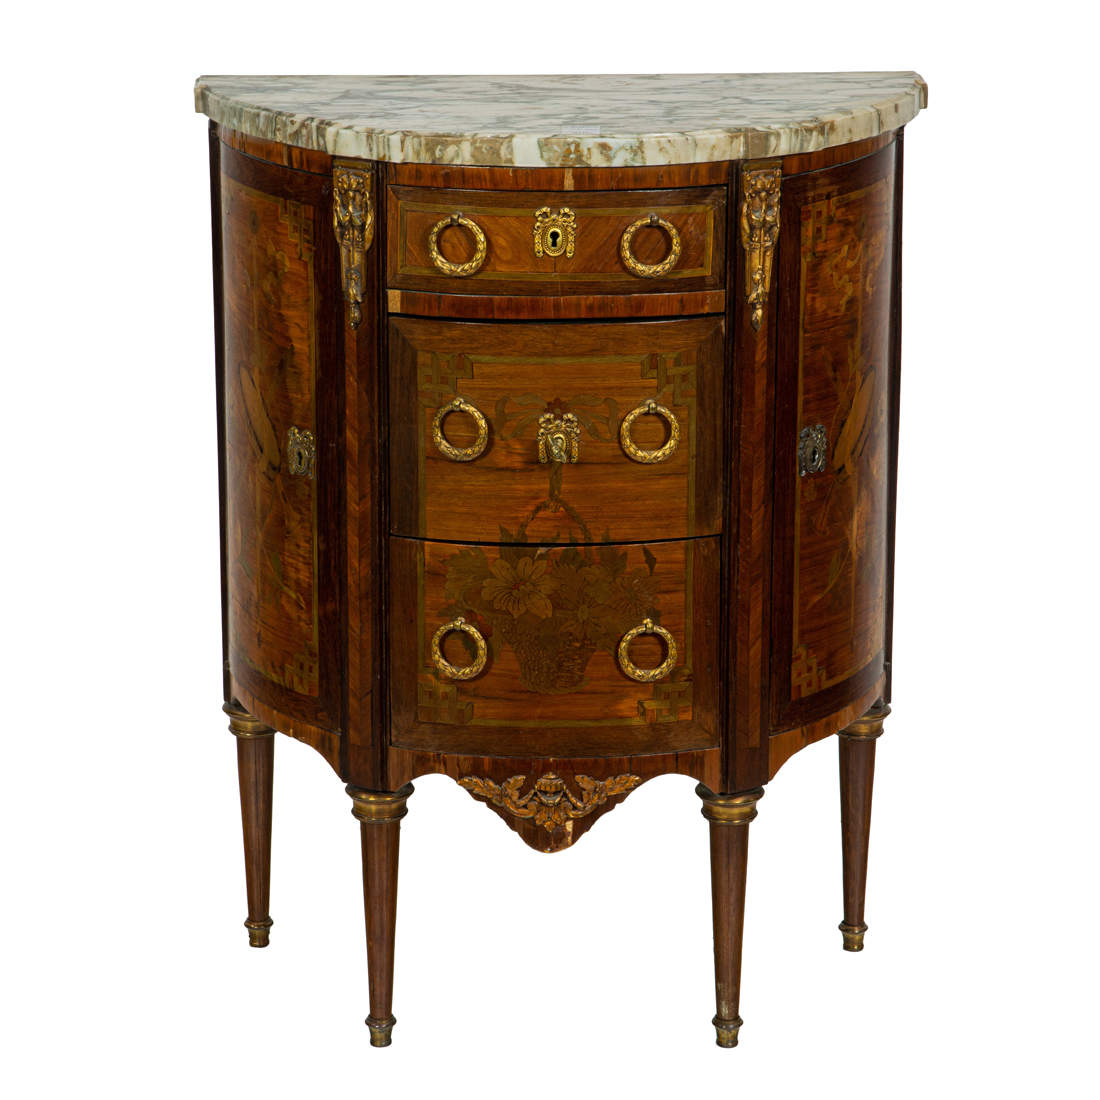 A LOUIS XV STYLE DEMILUNE INLAID 3a196f